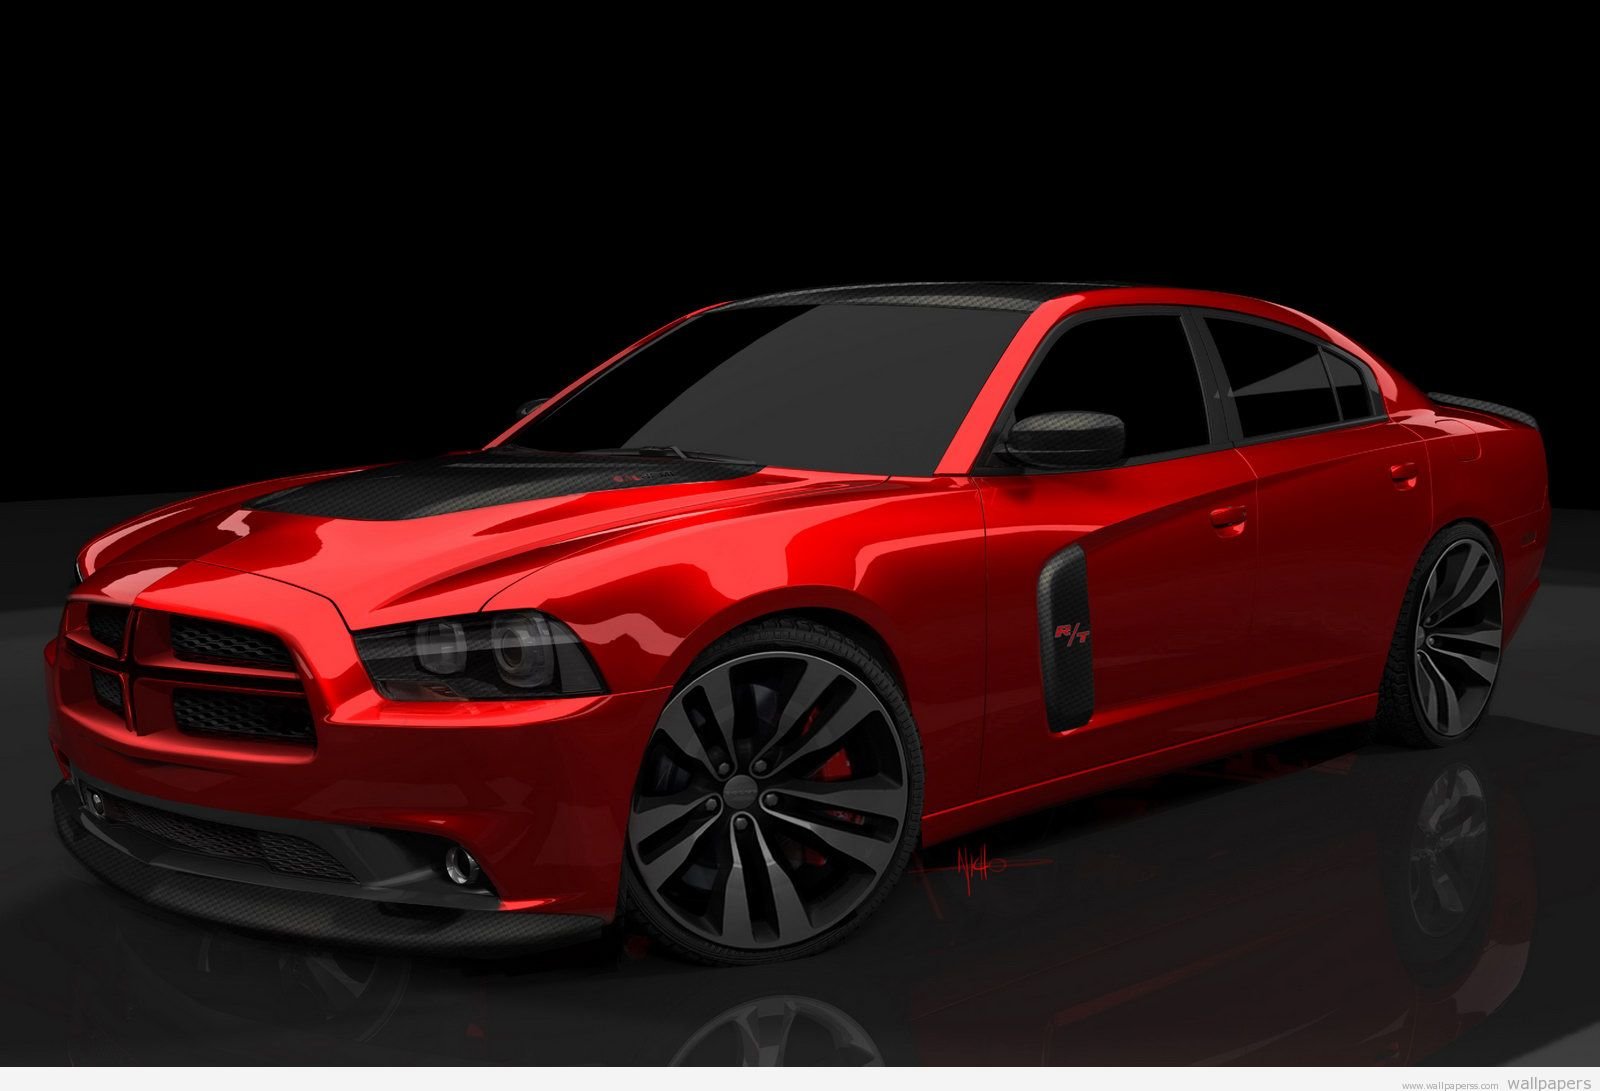 Dodge Charger Wallpapers 4889 Hd Wallpapers in Cars   Imagescicom